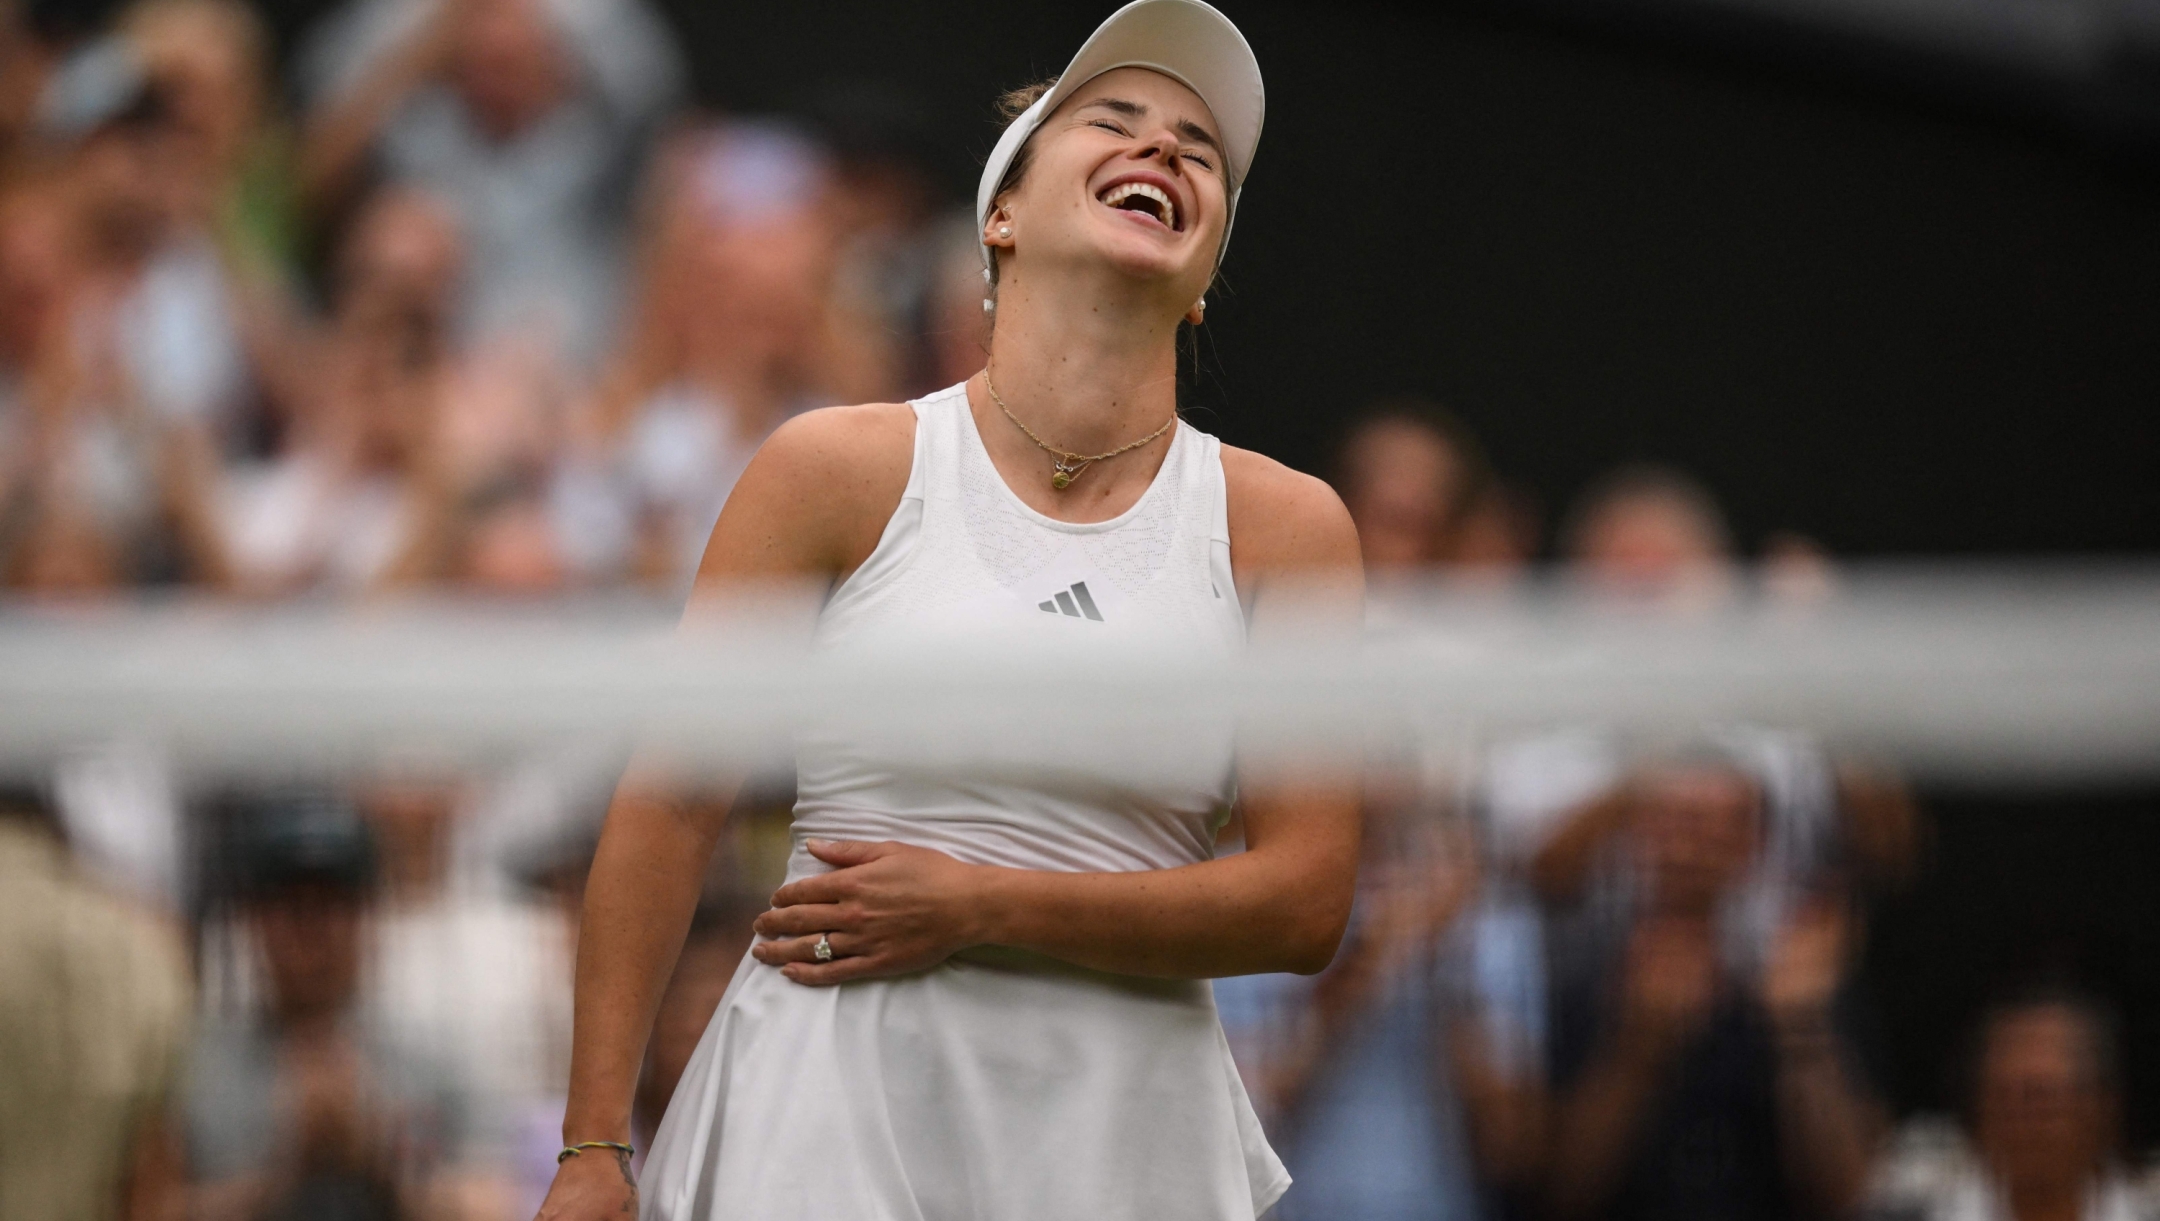 TOPSHOT - Ukraine's Elina Svitolina celebrates winning against Poland's Iga Swiatek during their women's singles quarter-finals tennis match on the ninth day of the 2023 Wimbledon Championships at The All England Tennis Club in Wimbledon, southwest London, on July 11, 2023. (Photo by Daniel LEAL / AFP) / RESTRICTED TO EDITORIAL USE